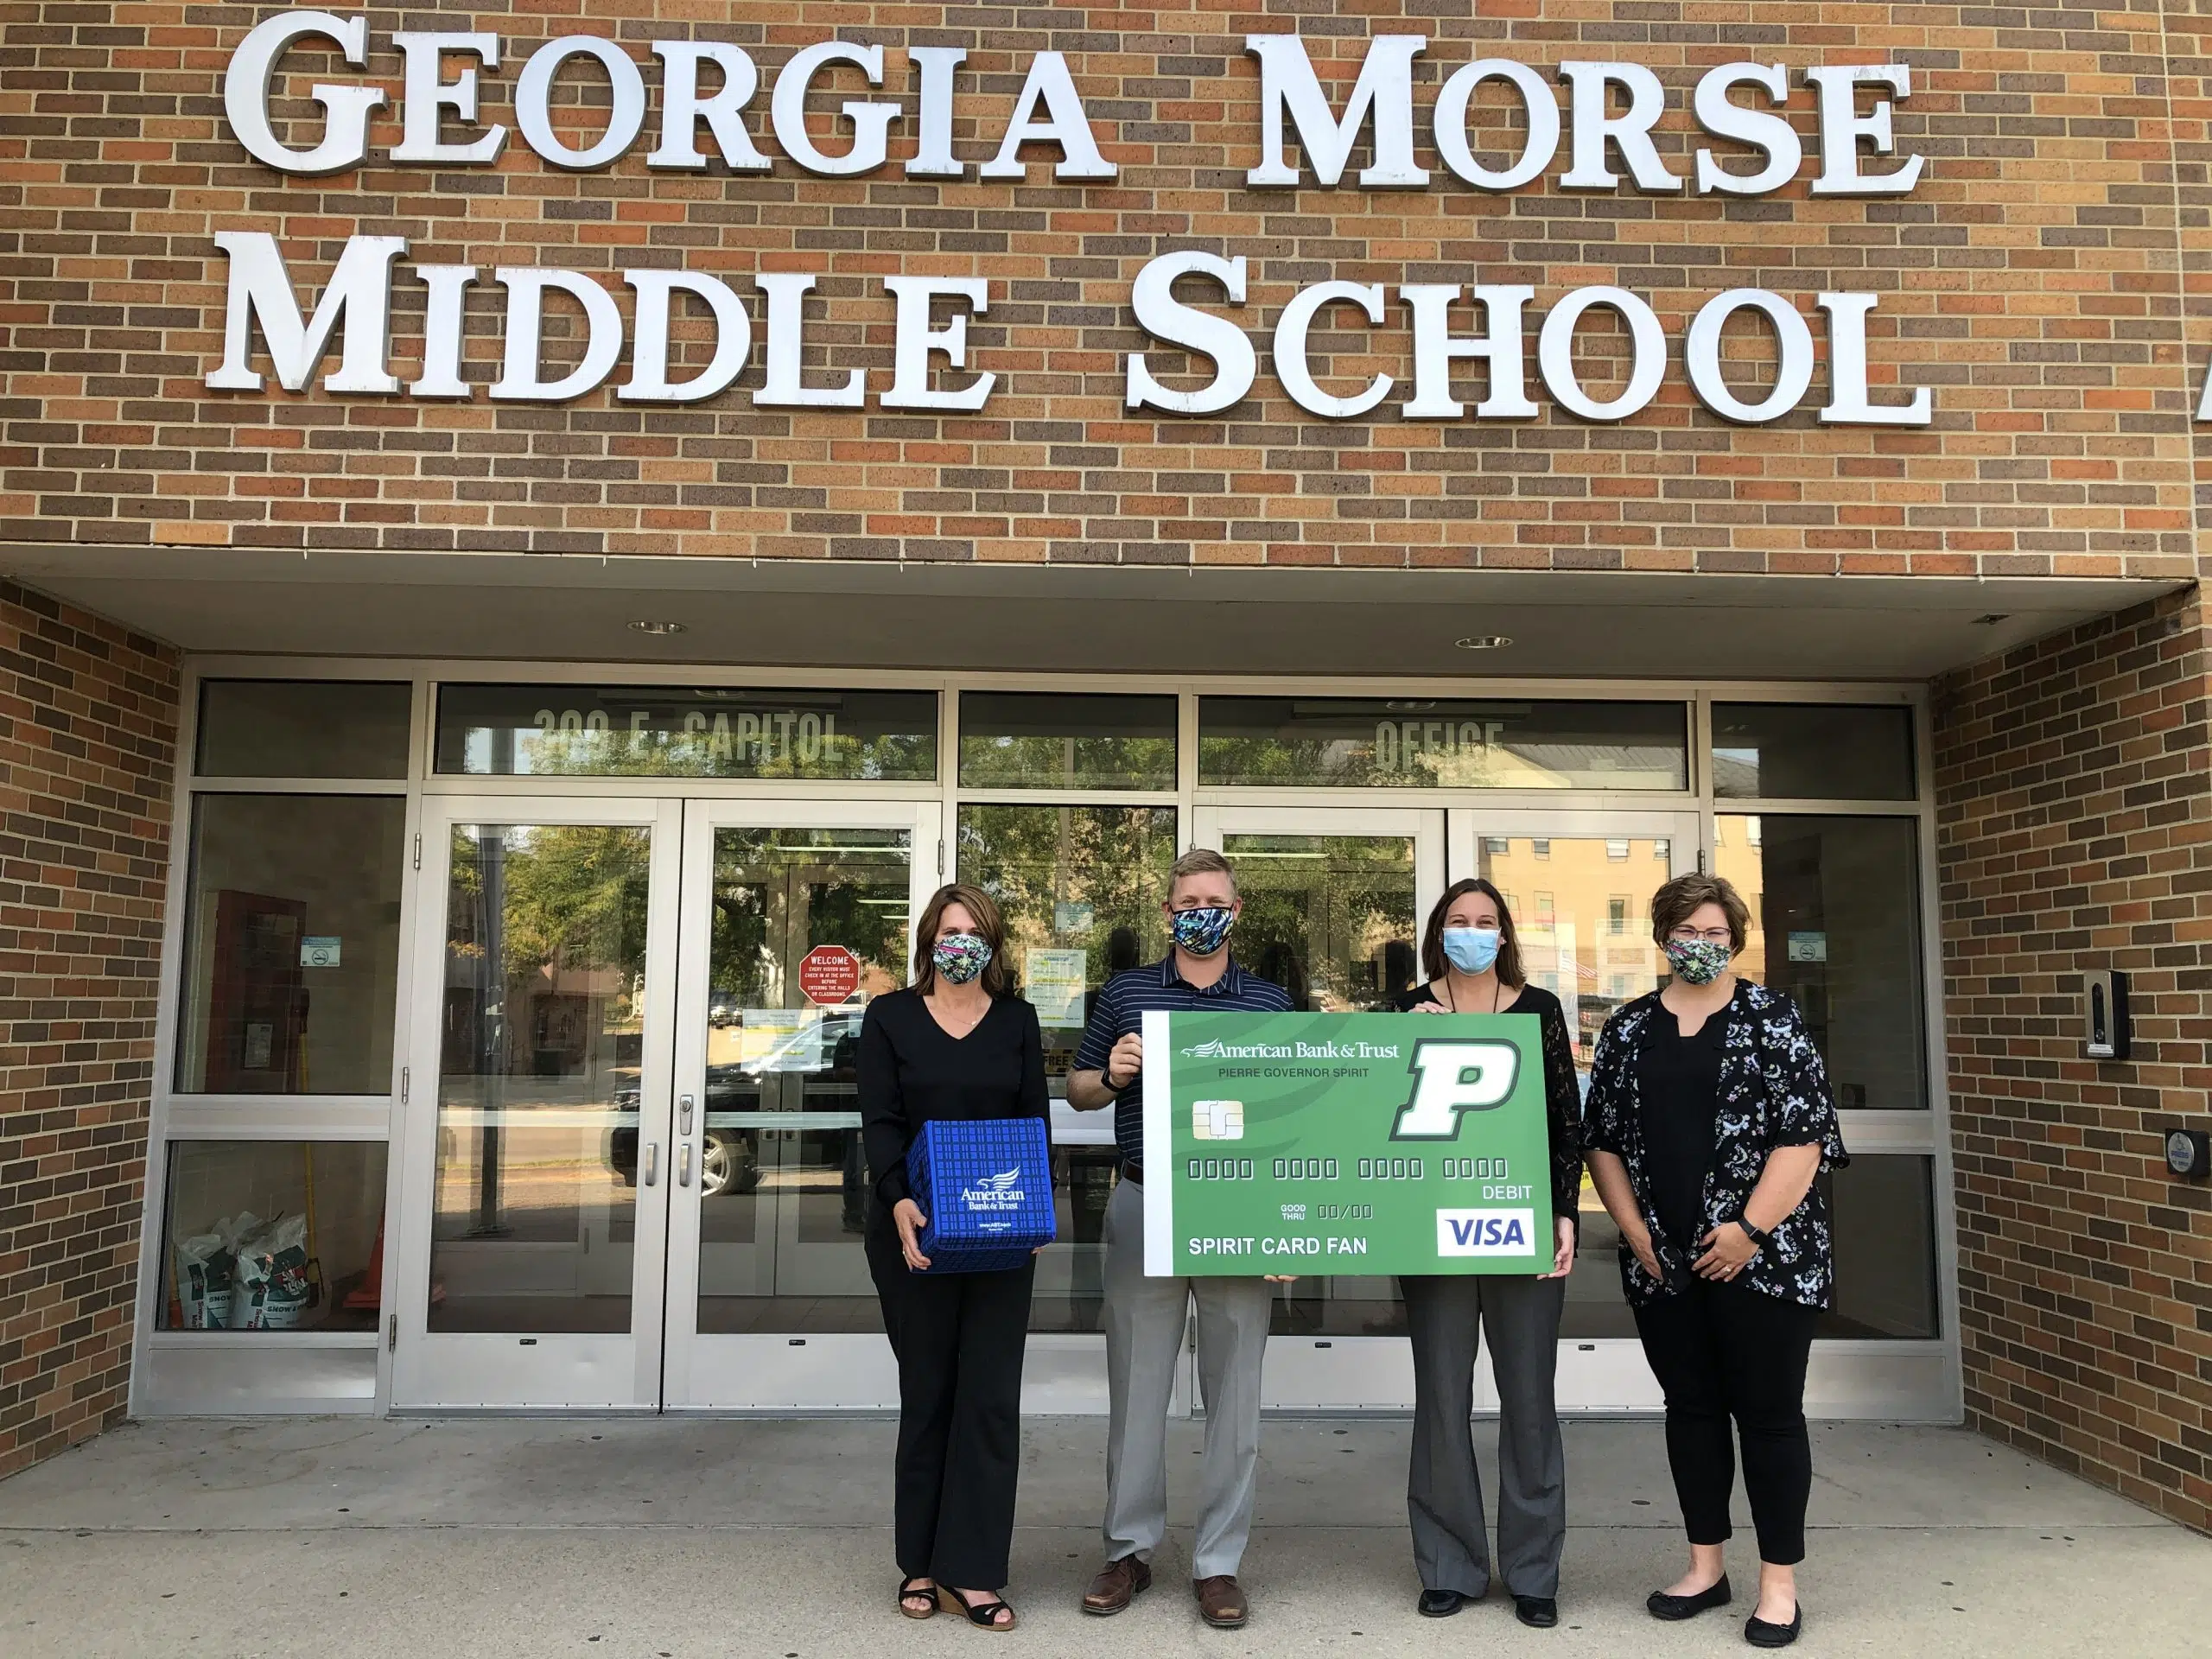 american bank and trust pierre georgia morse middle school facemask donation